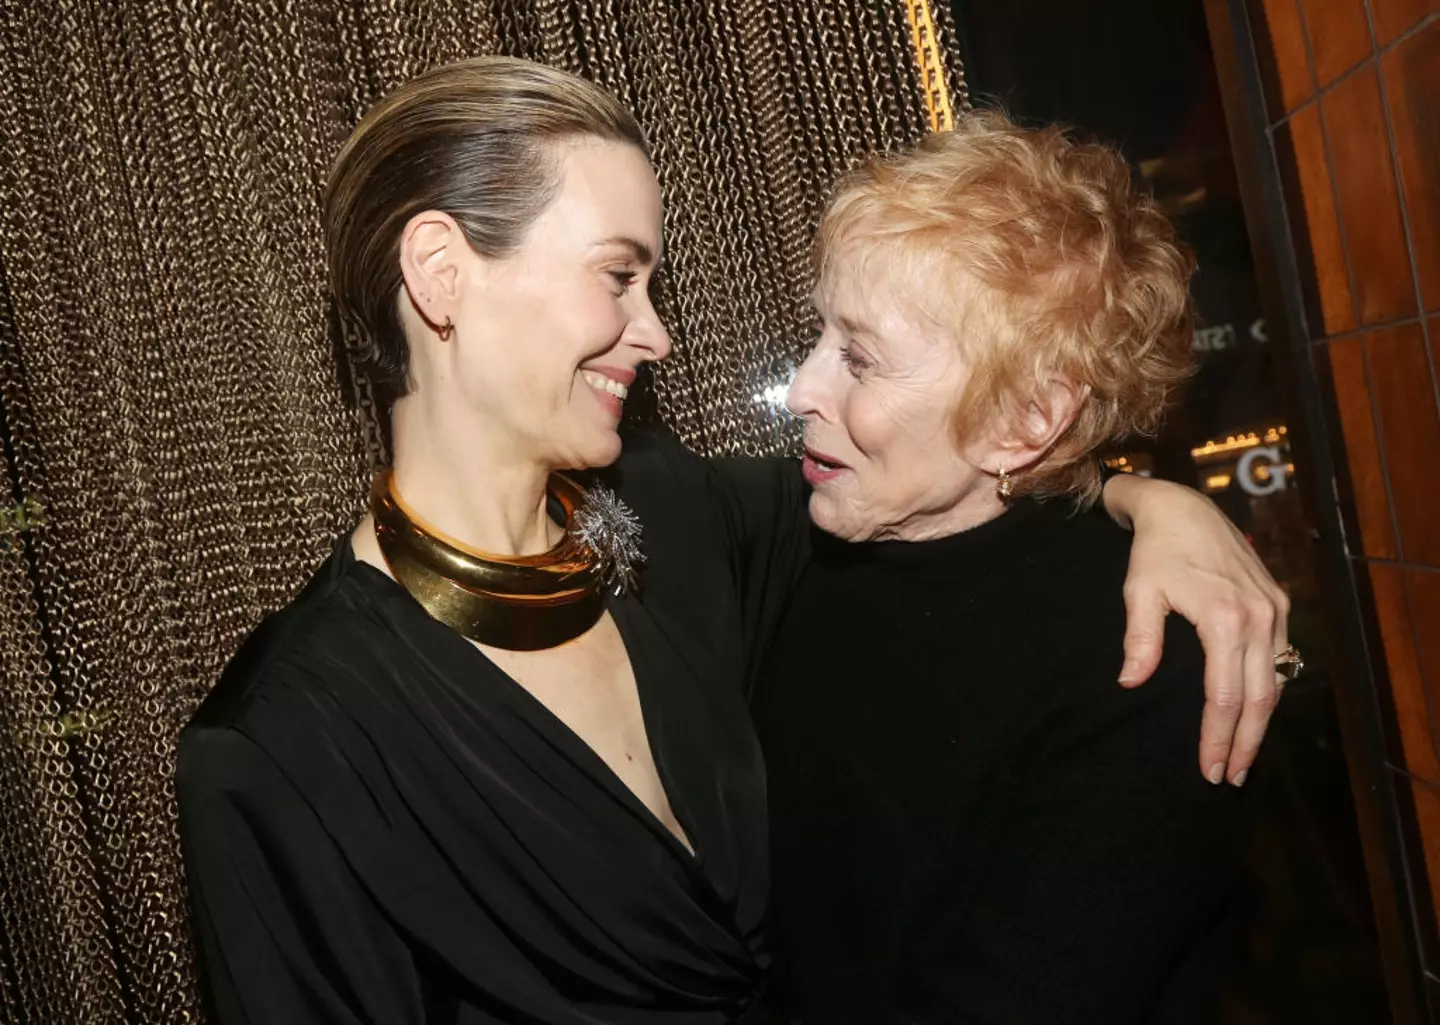 Sarah Paulson and Holland Taylor have been in a relationship since 2015. (Bruce Glikas/WireImage)